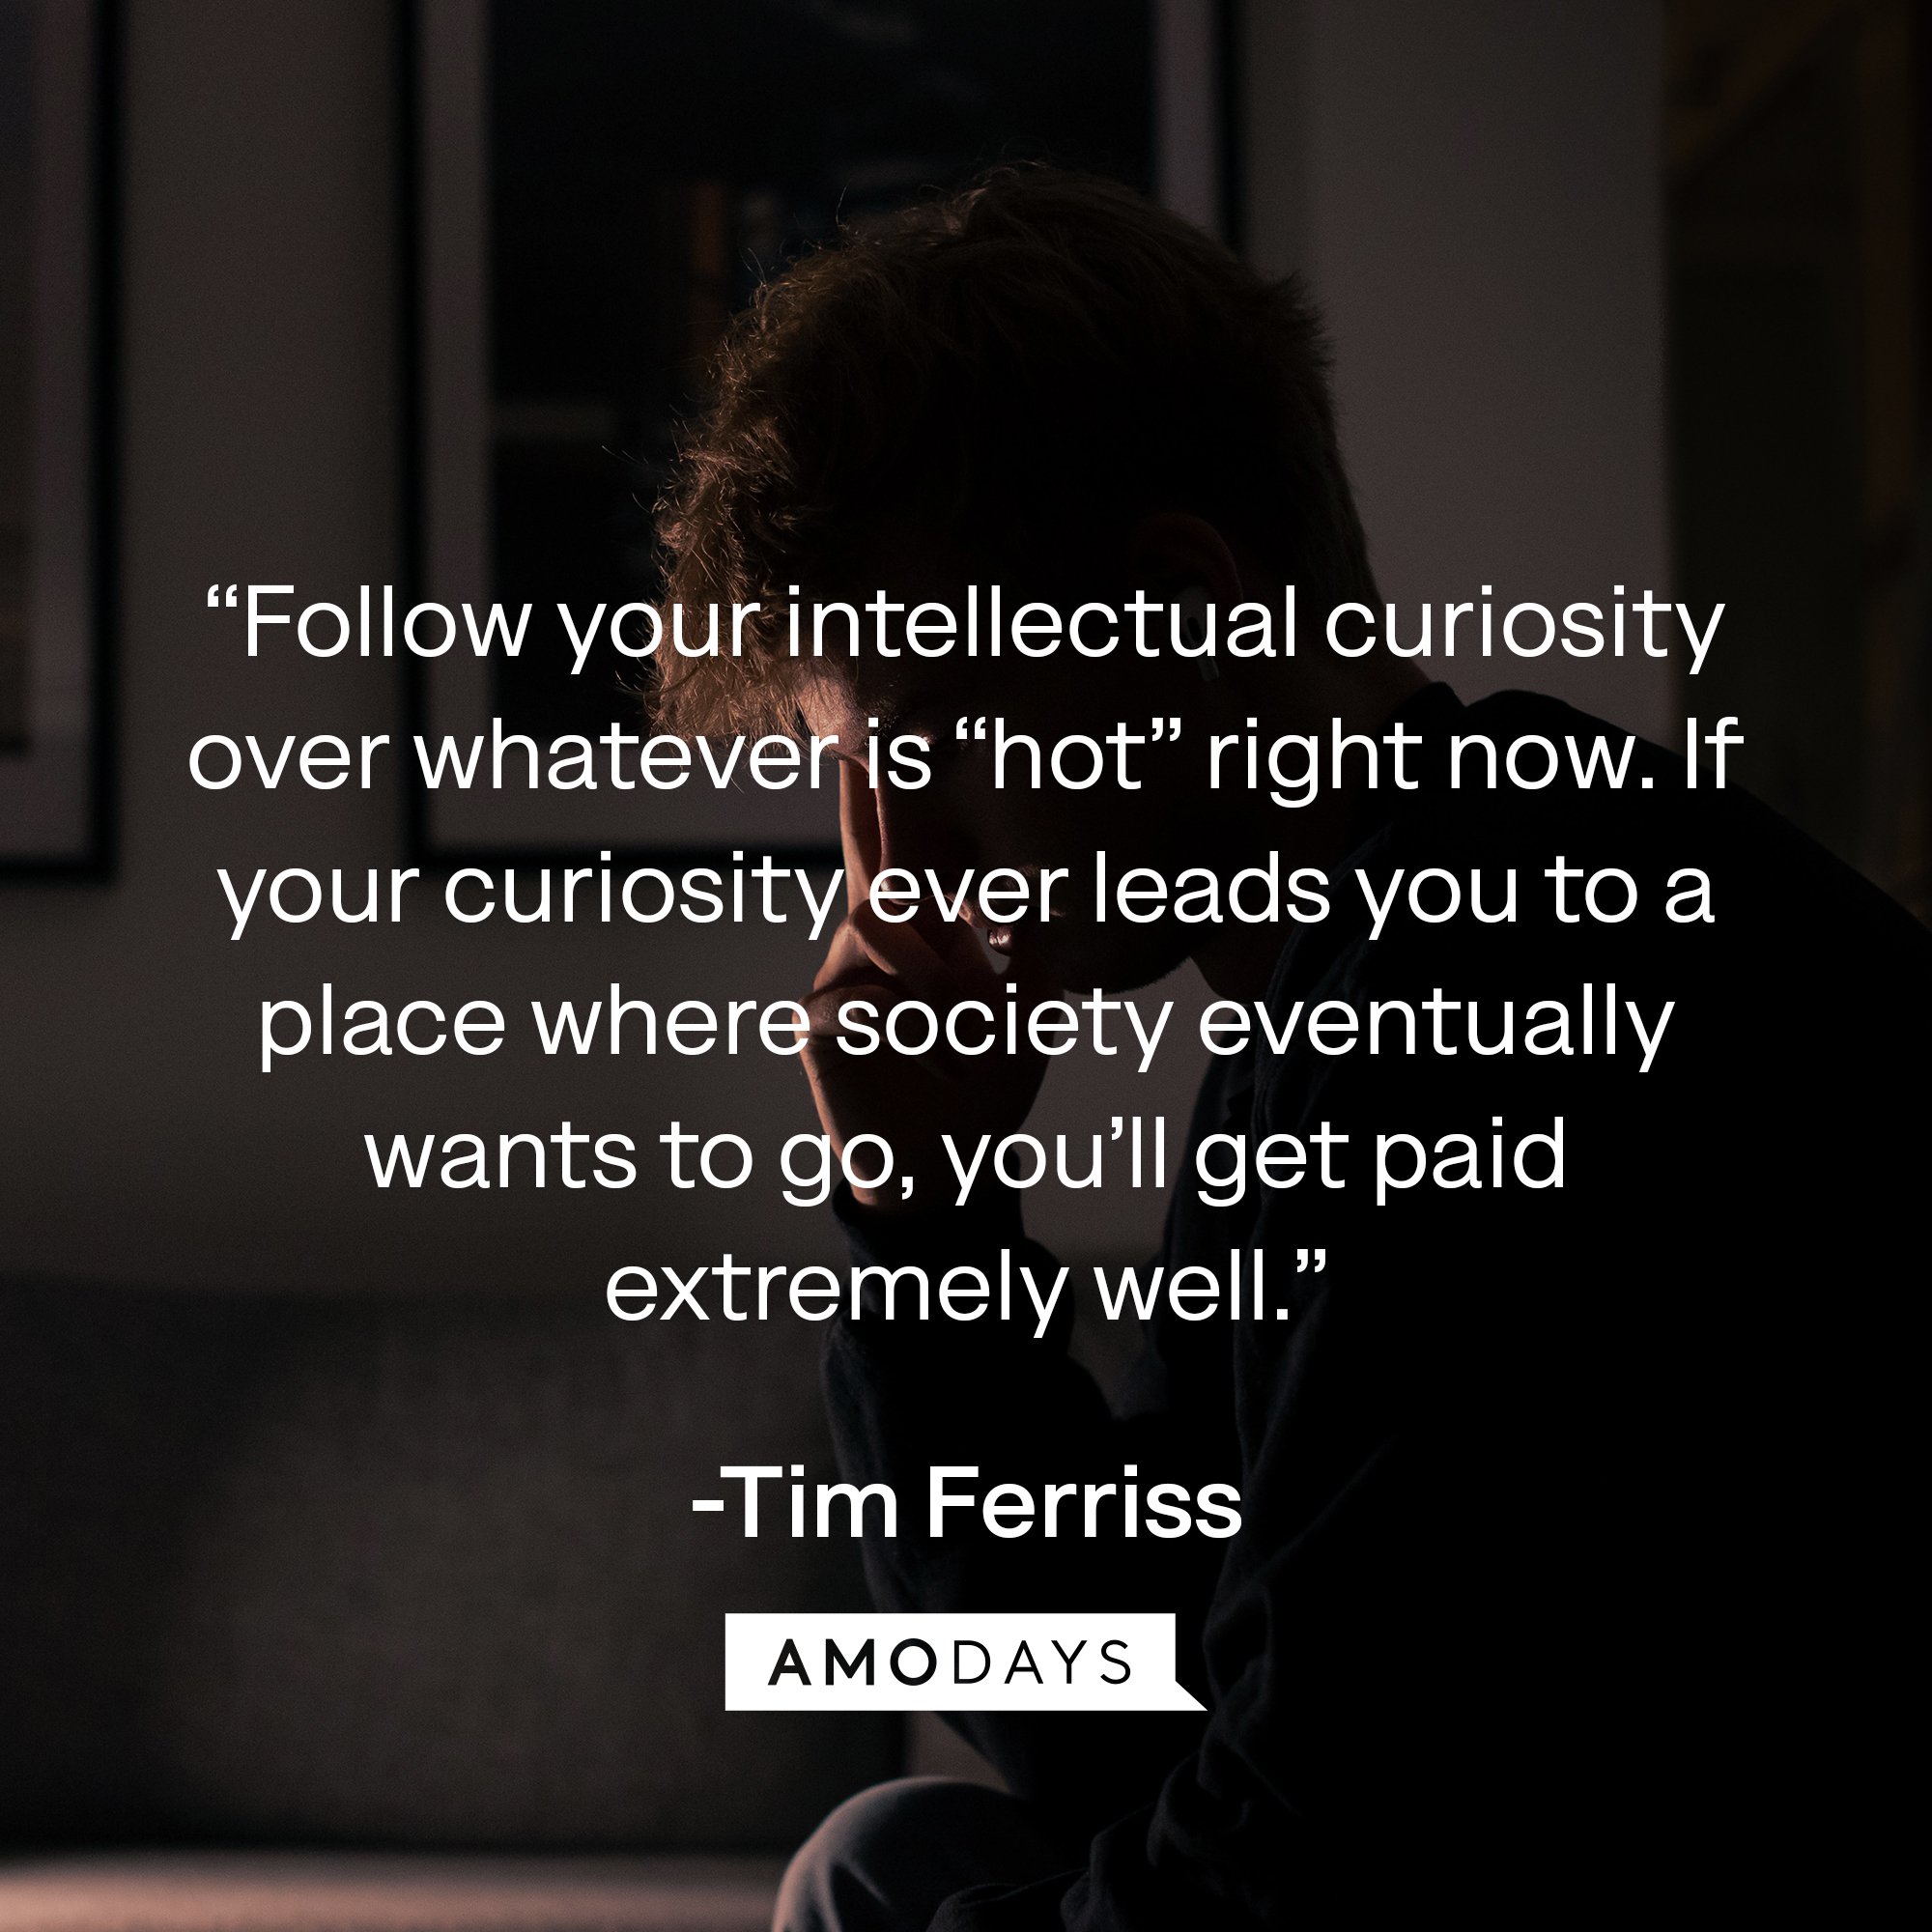 Tim Ferriss's quote: “Follow your intellectual curiosity over whatever is “hot” right now. If your curiosity ever leads you to a place where society eventually wants to go, you’ll get paid extremely well.” | Image: AmoDays